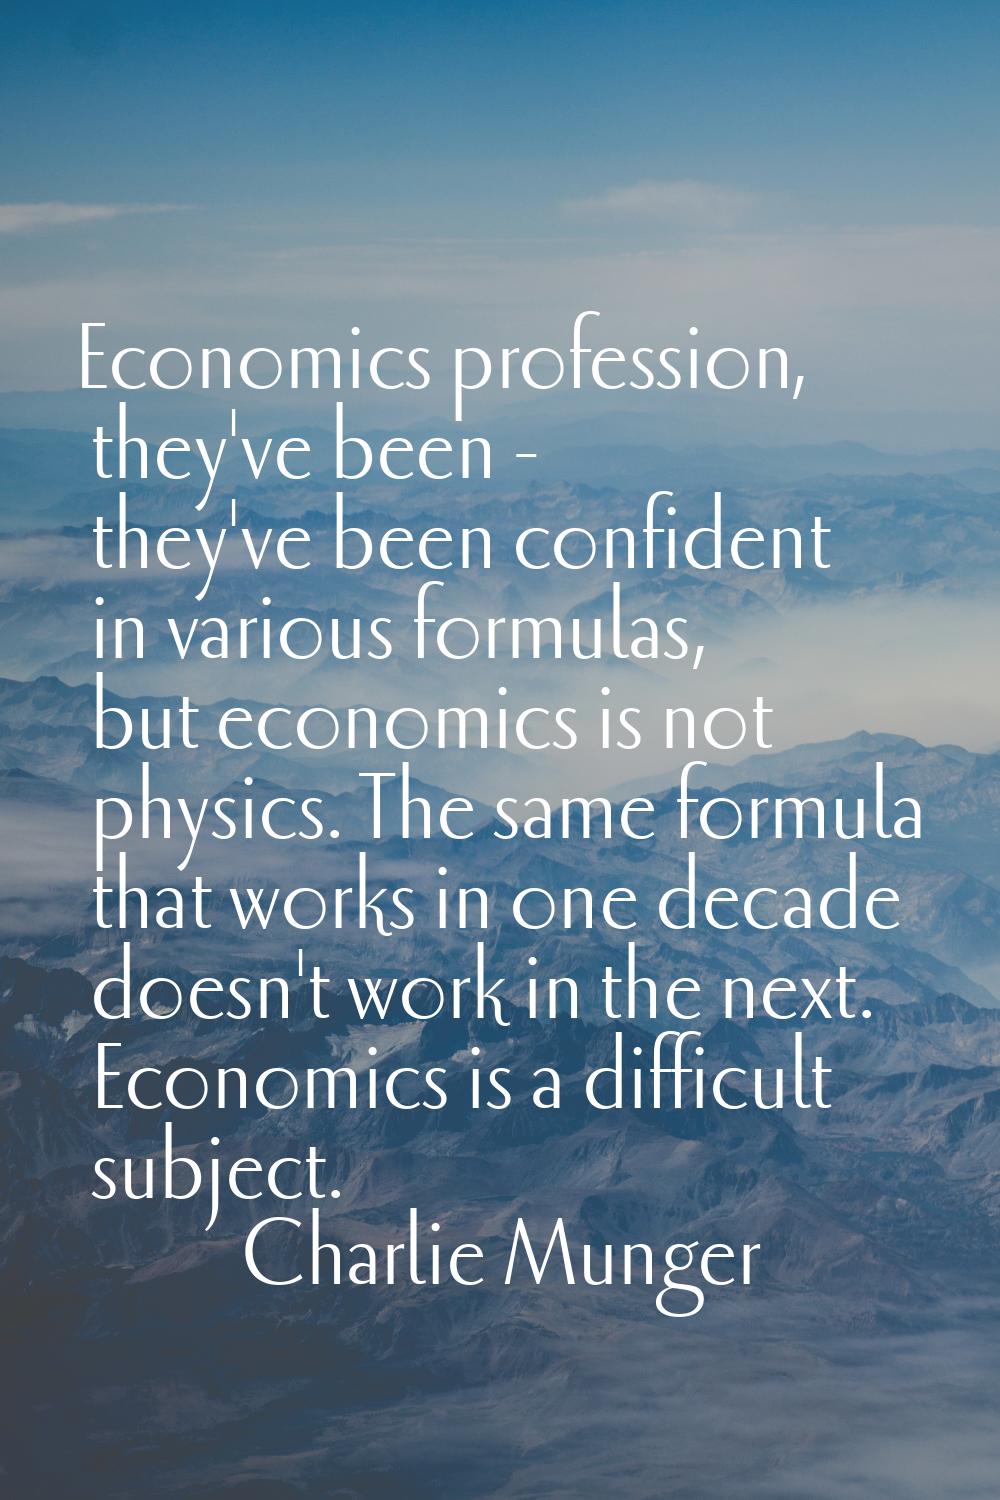 Economics profession, they've been - they've been confident in various formulas, but economics is n